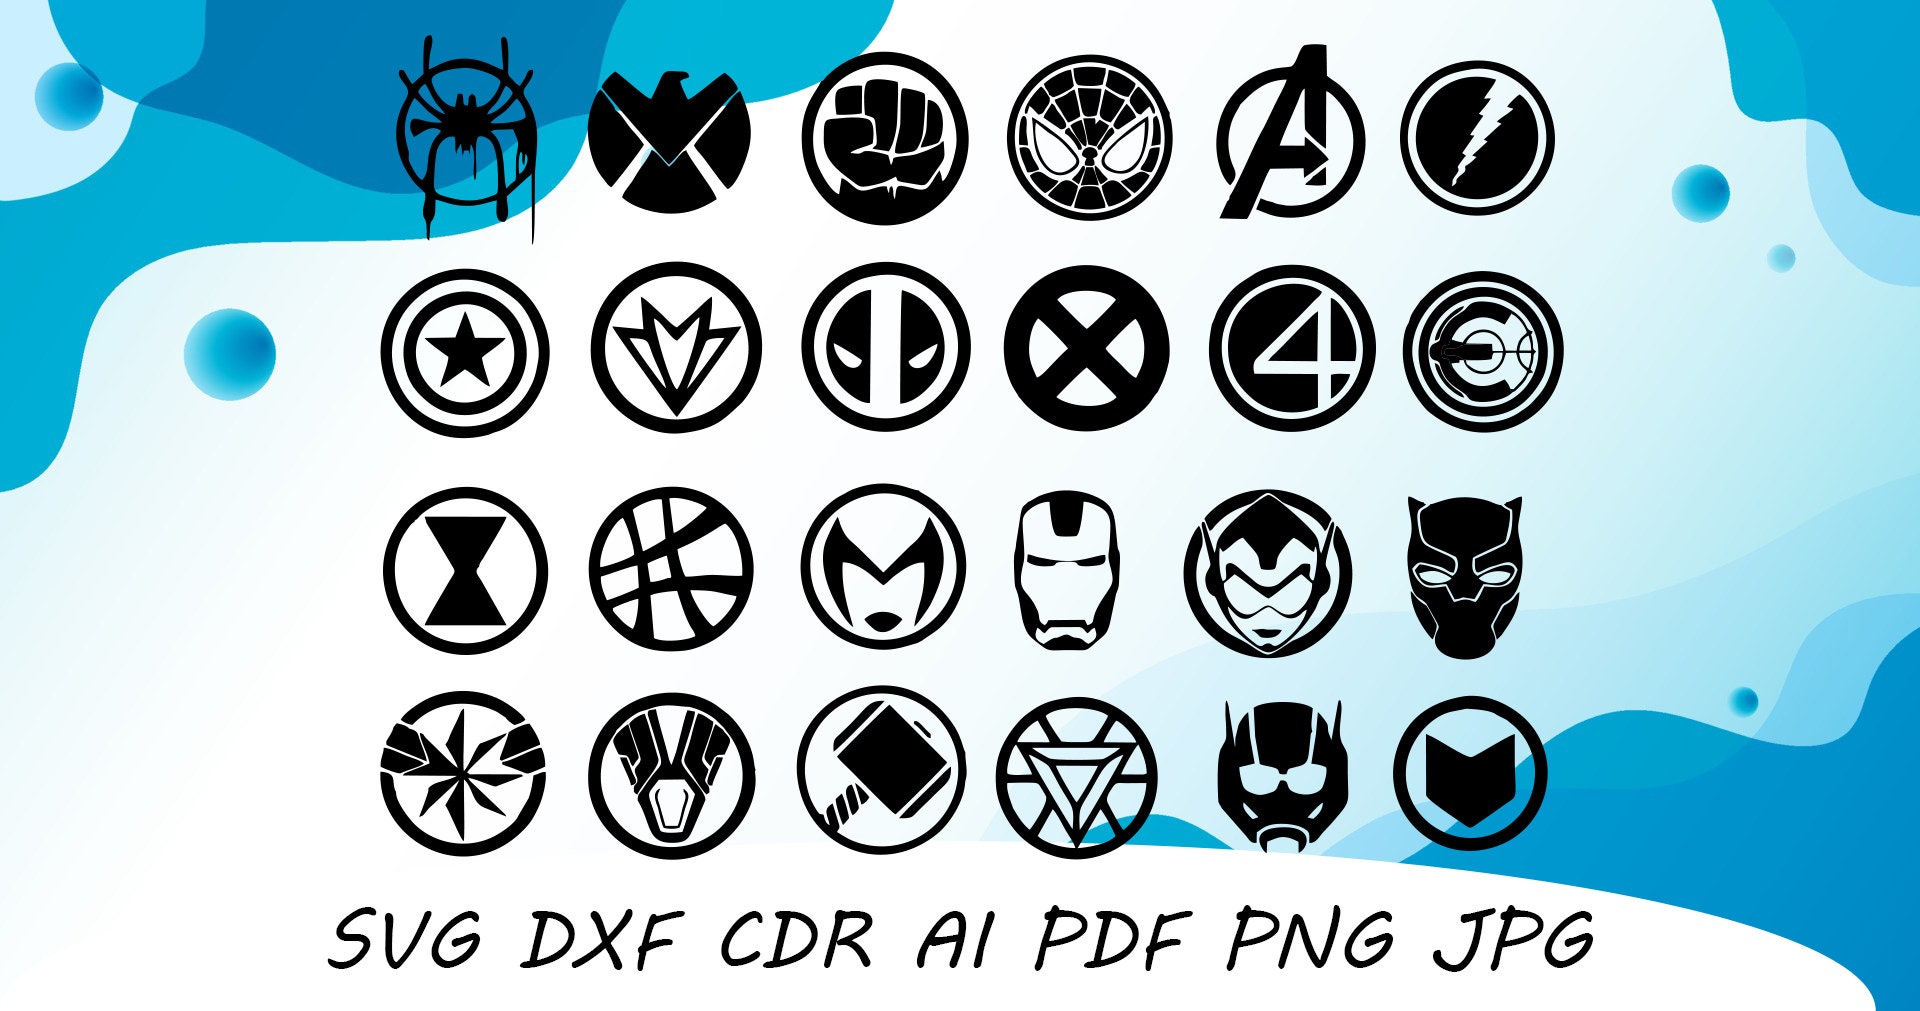 Avengers Logo Marvel 24 Pieces Cut Svg Dxf File Wall Sticker ...